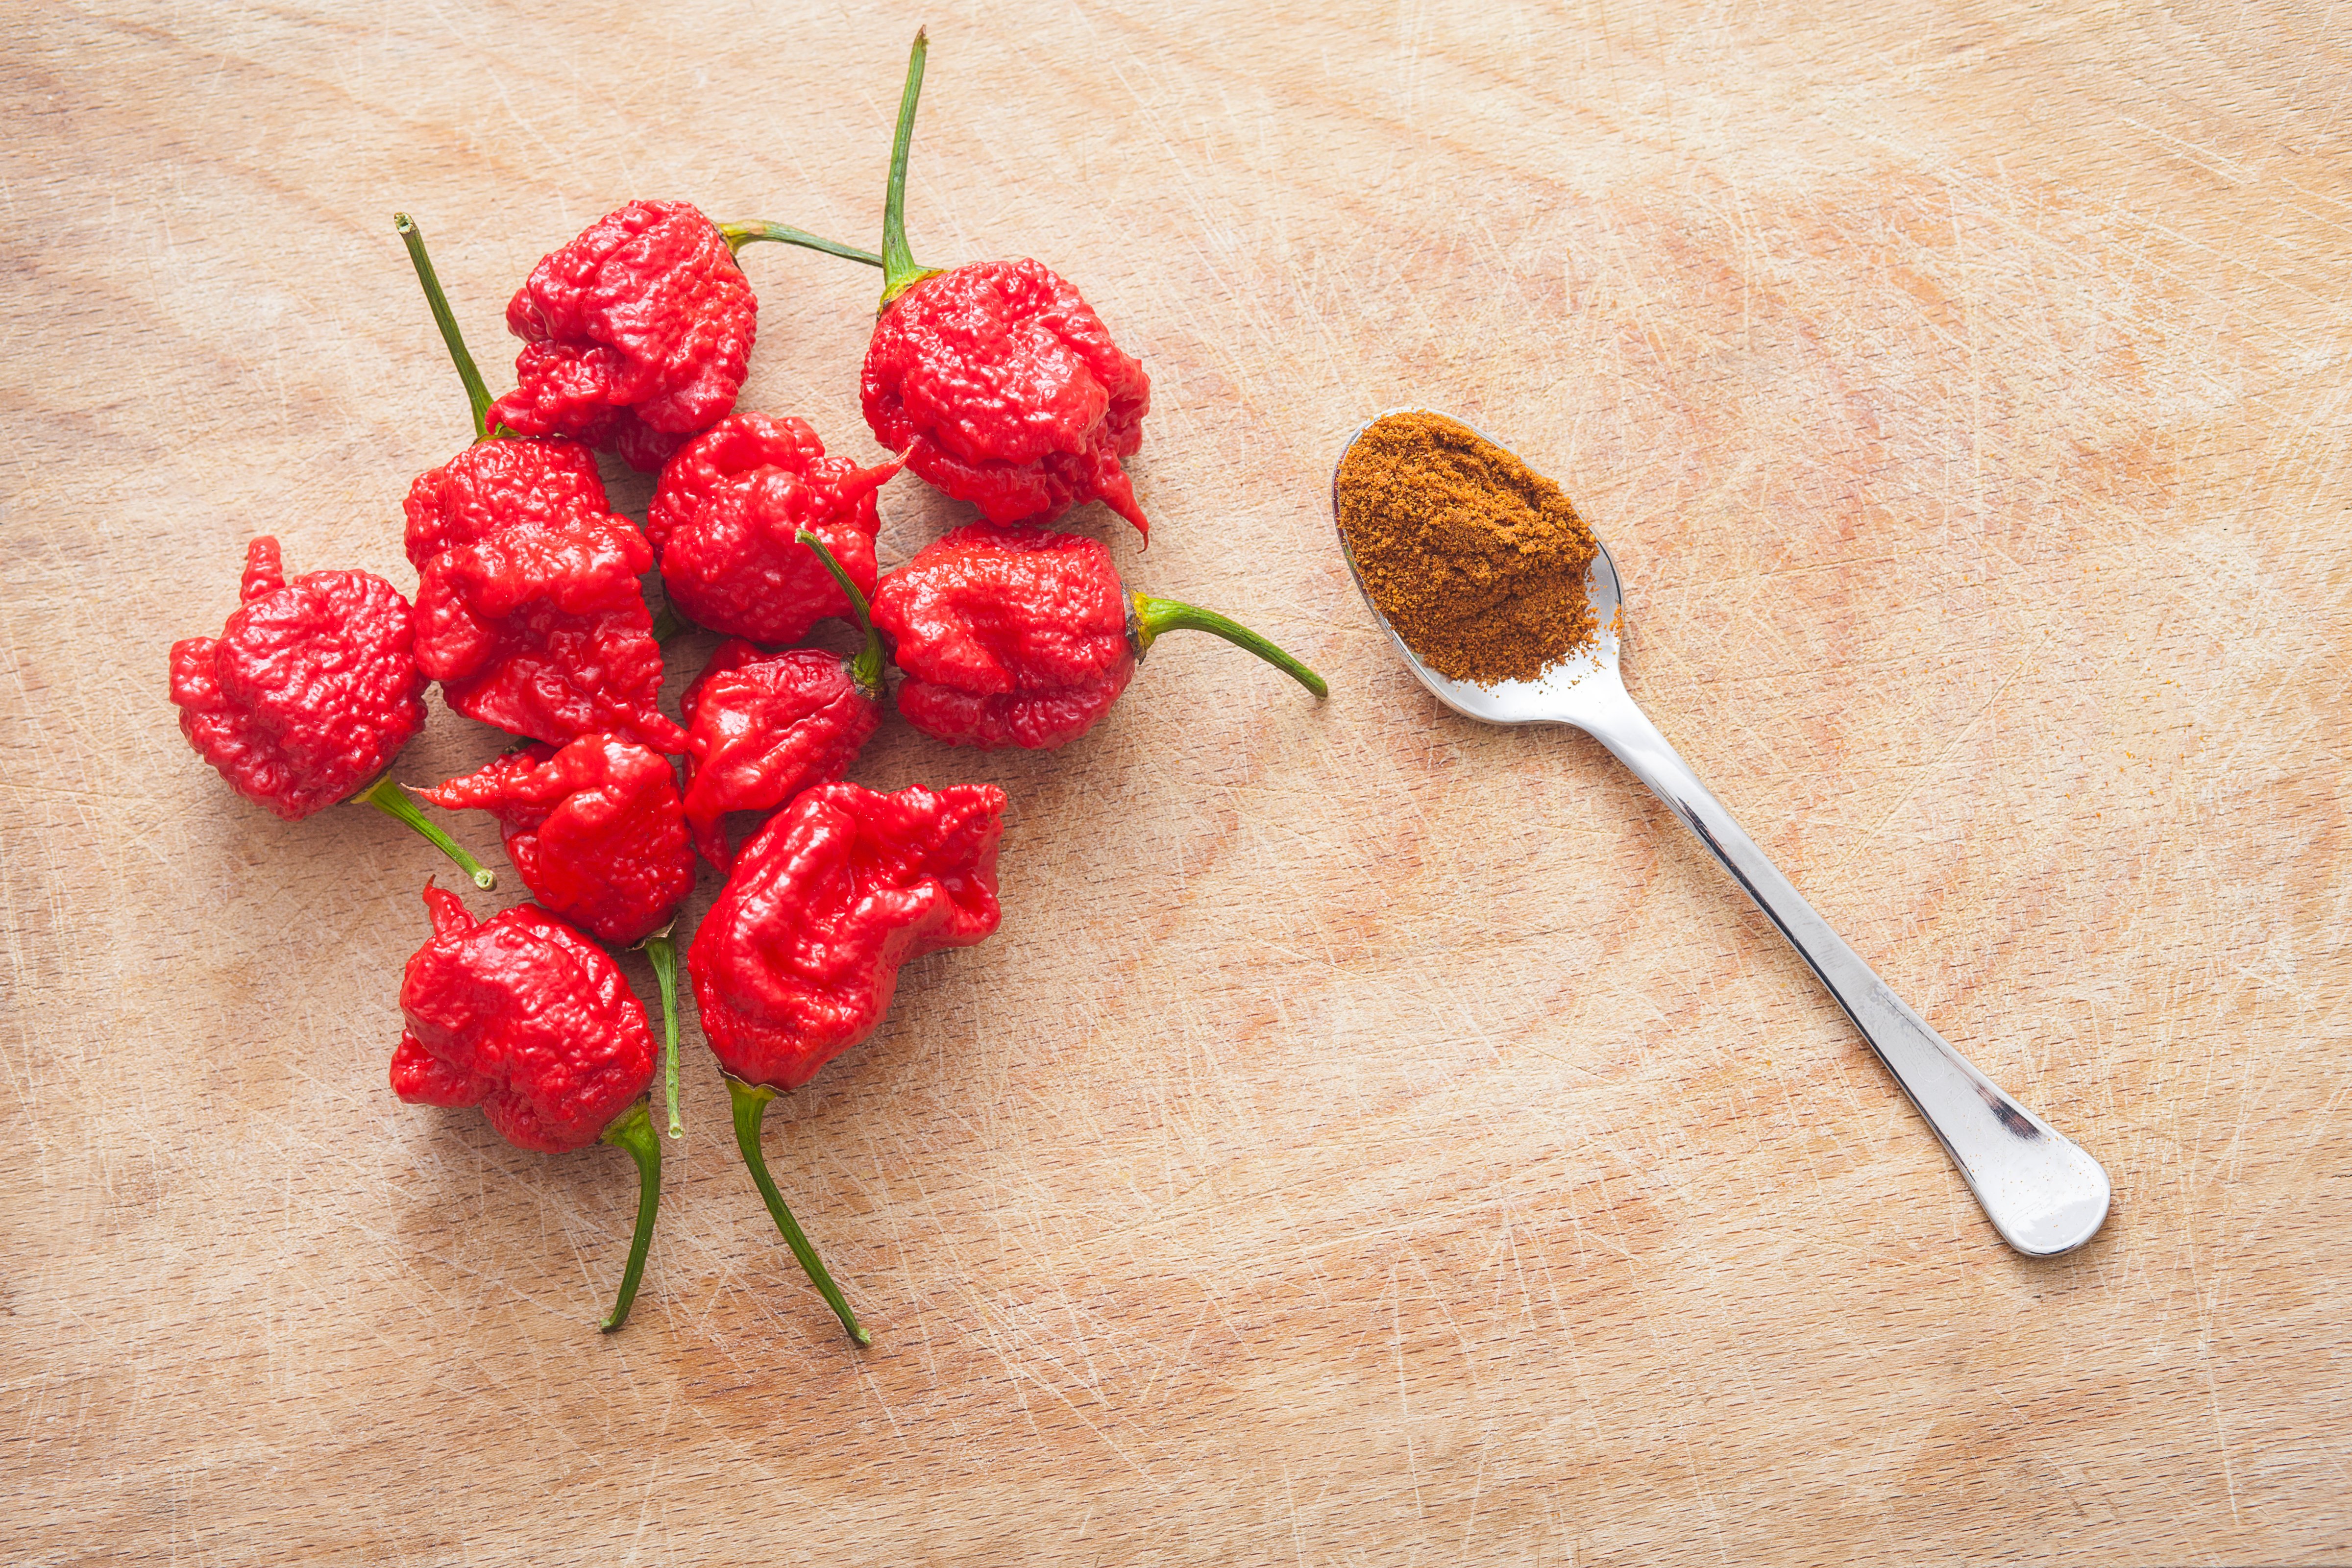 Carolina Reapers are considered the world's hottest chili pepper. (LuiL&mdash;Getty Images/iStockphoto)